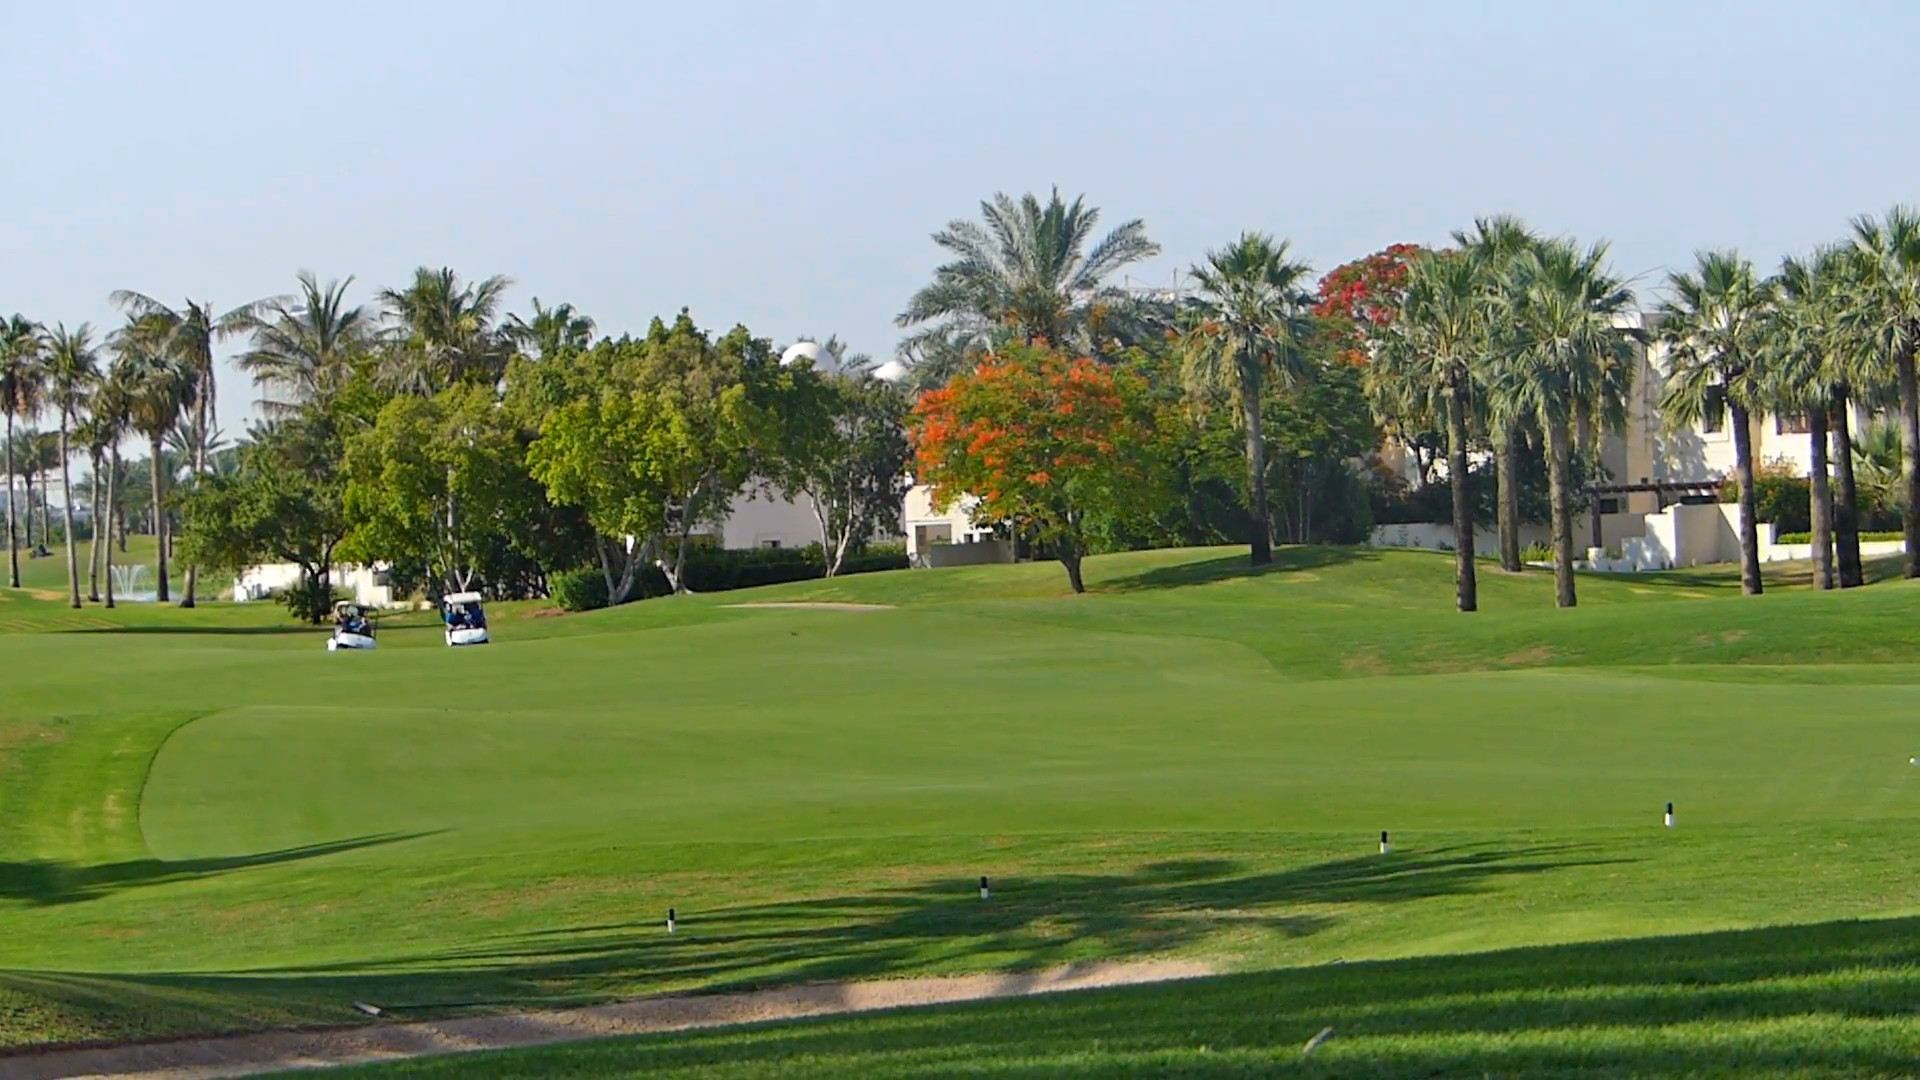 1920x1080 Perfect golf resort in Dubai city, with green grass, unrecognizable person  in a background driving a golf vehicle Stock Video Footage - VideoBlocks